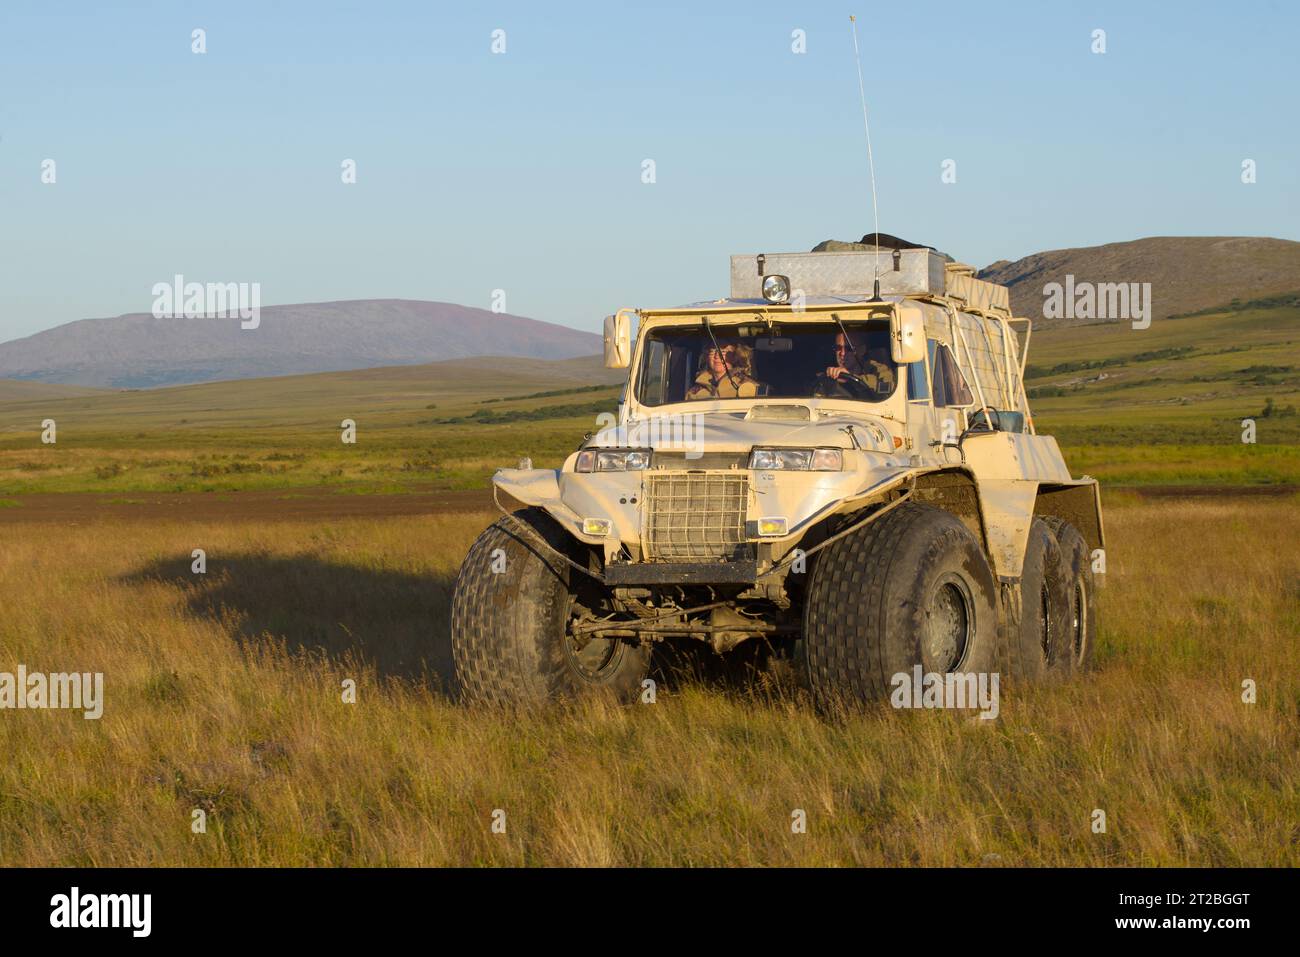 YAMAL, RUSSIA - AUGUST 22, 2018: TREKOL all-terrain vehicle in the tundra on August evening Stock Photo